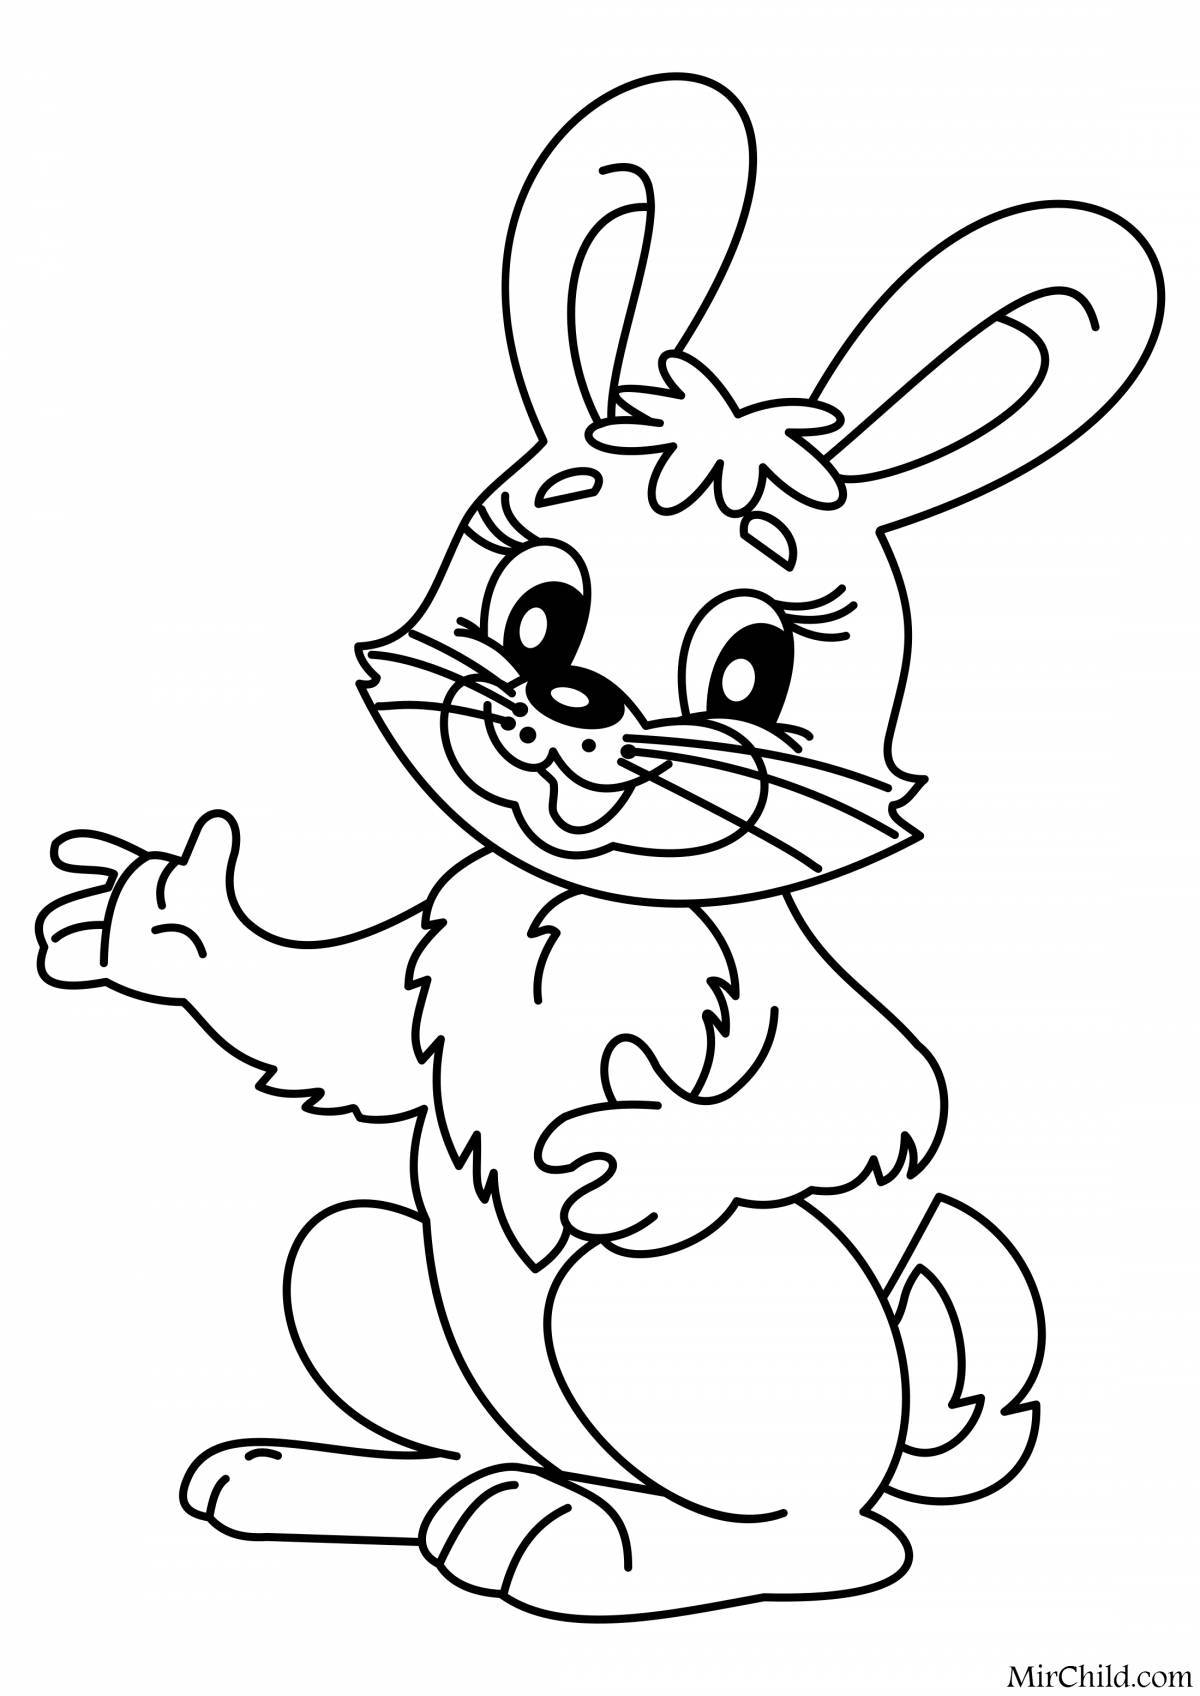 Bunny soft coloring page